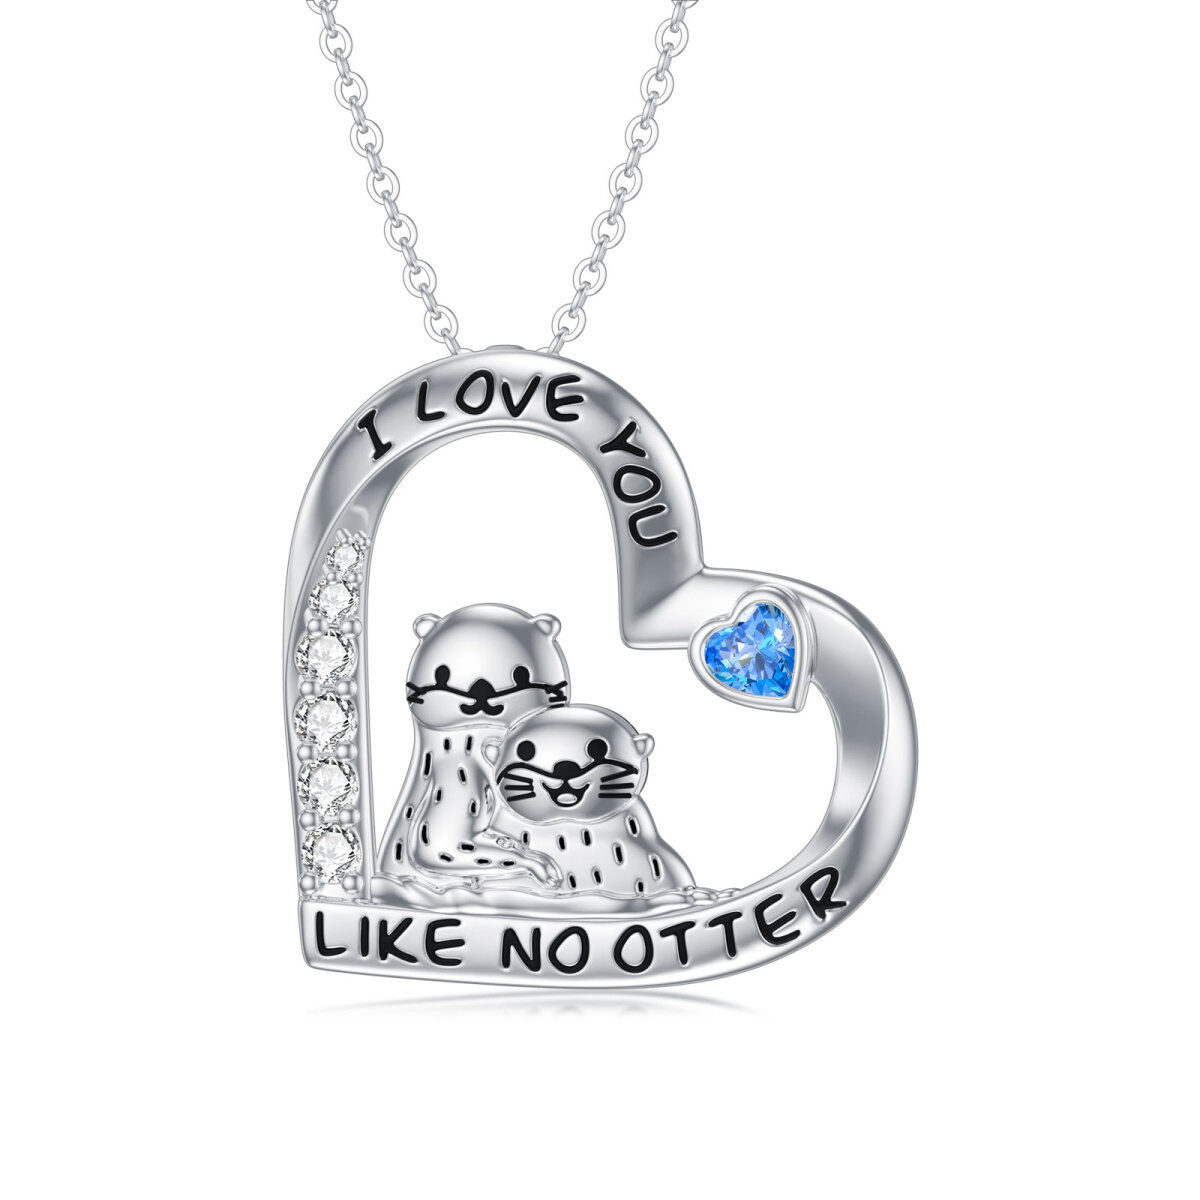 Sterling Silver Circular Shaped & Heart Shaped Cubic Zirconia Sea Otter & Heart Pendant Necklace with Engraved Word-1